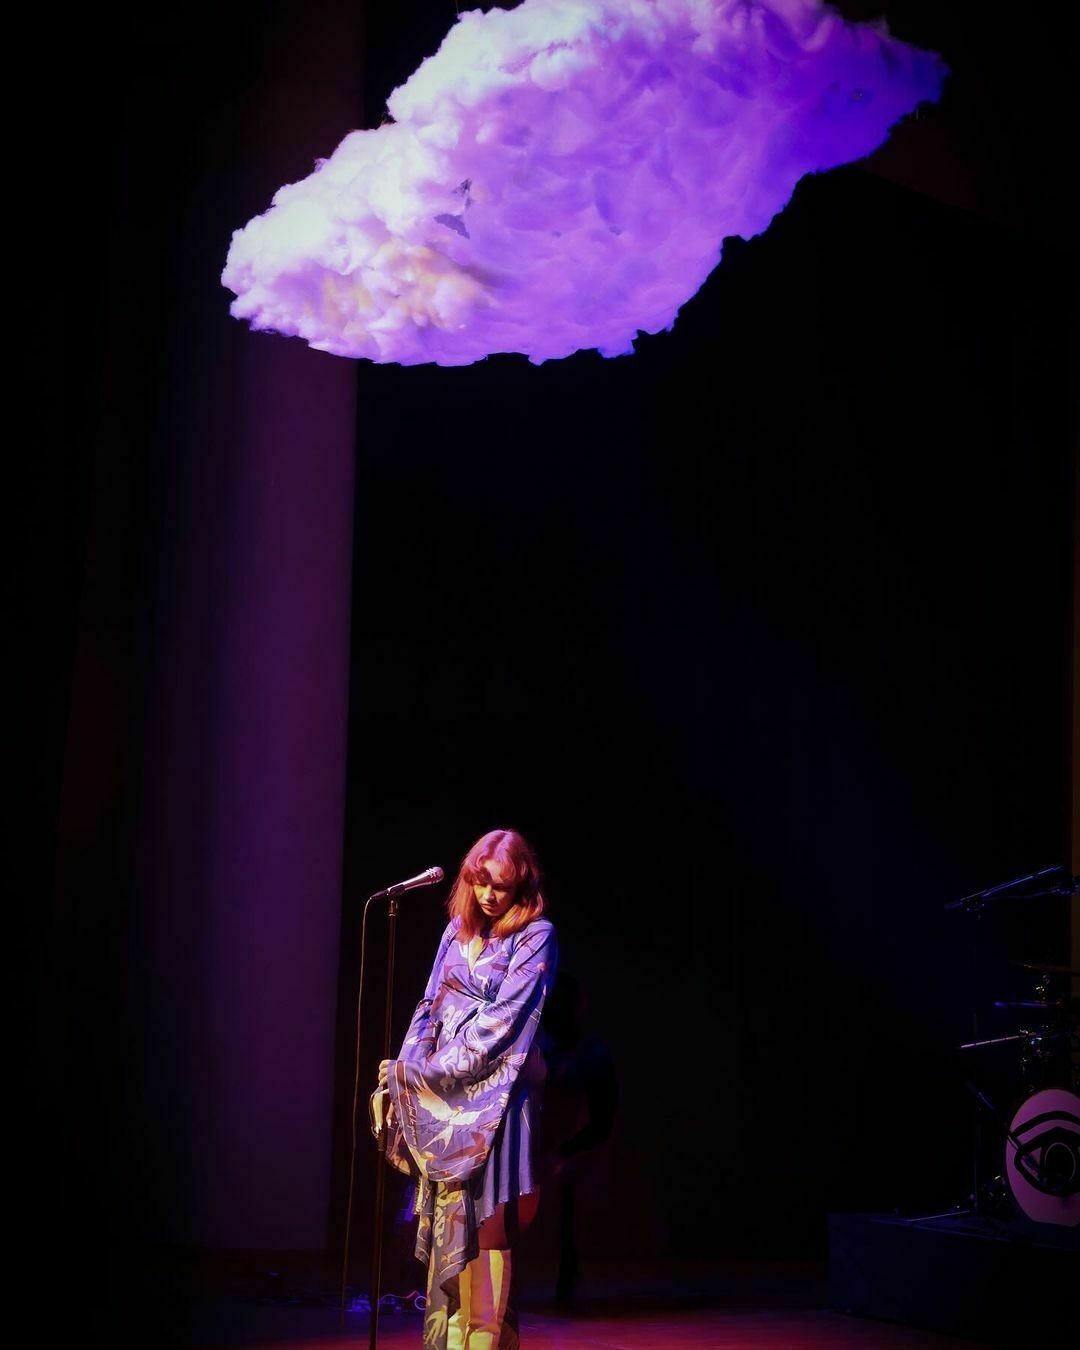 A woman (GERD) on stage with a microphone, looking down thoughtfully, with a large, illuminated cloud-like art installation floating above.